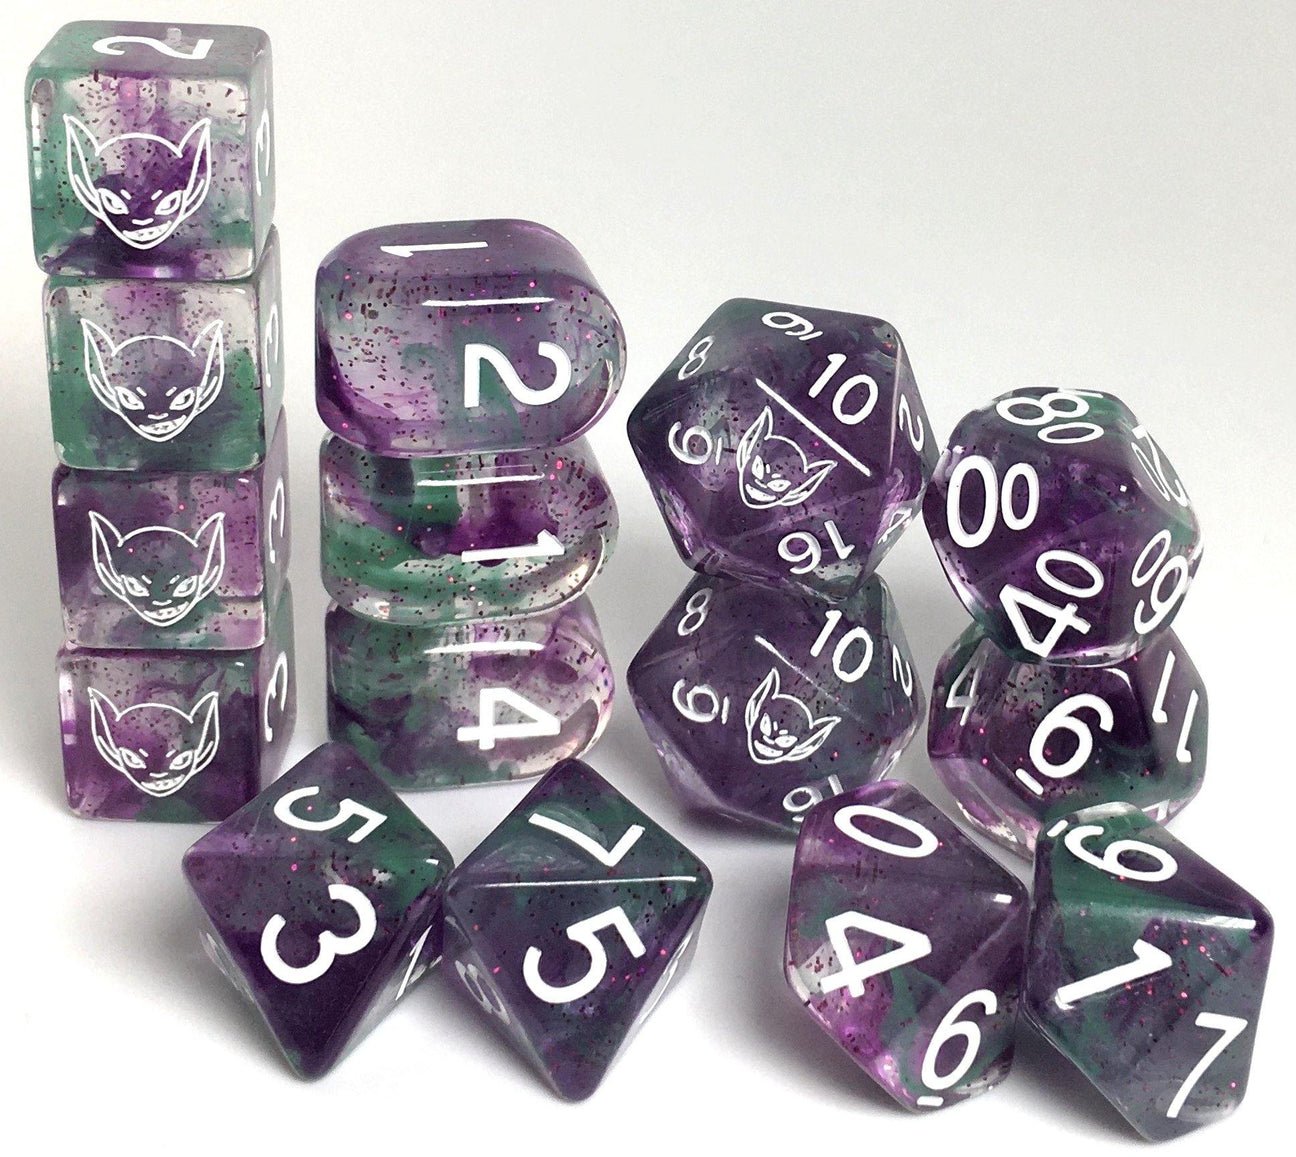 Goblin Green Diffusion Dice - 15 dice set (with Arch’d4™) - The Fourth Place